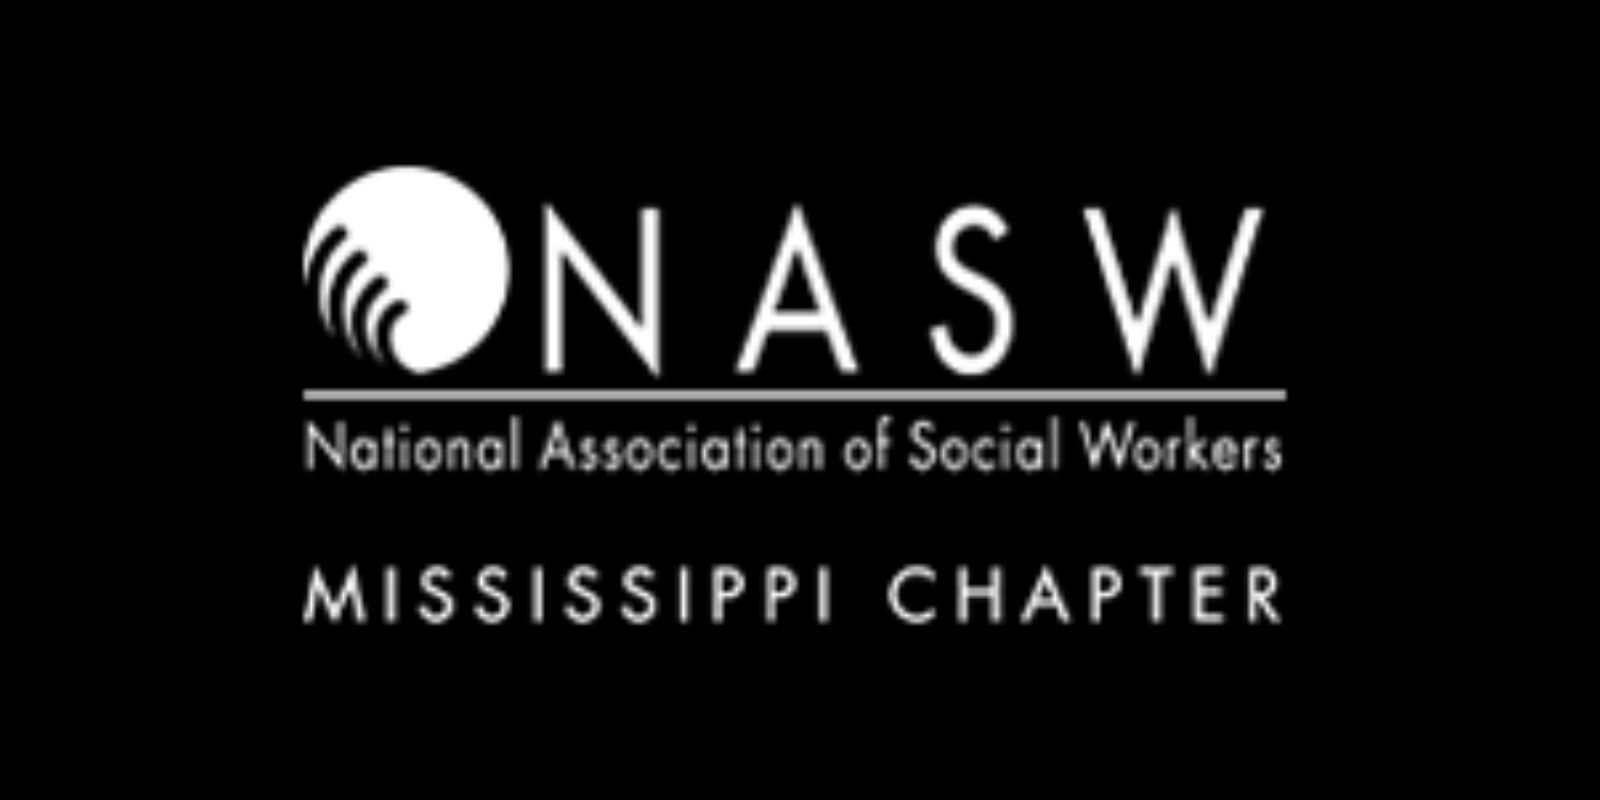 National Association of Social Workers - Mississippi Chapter